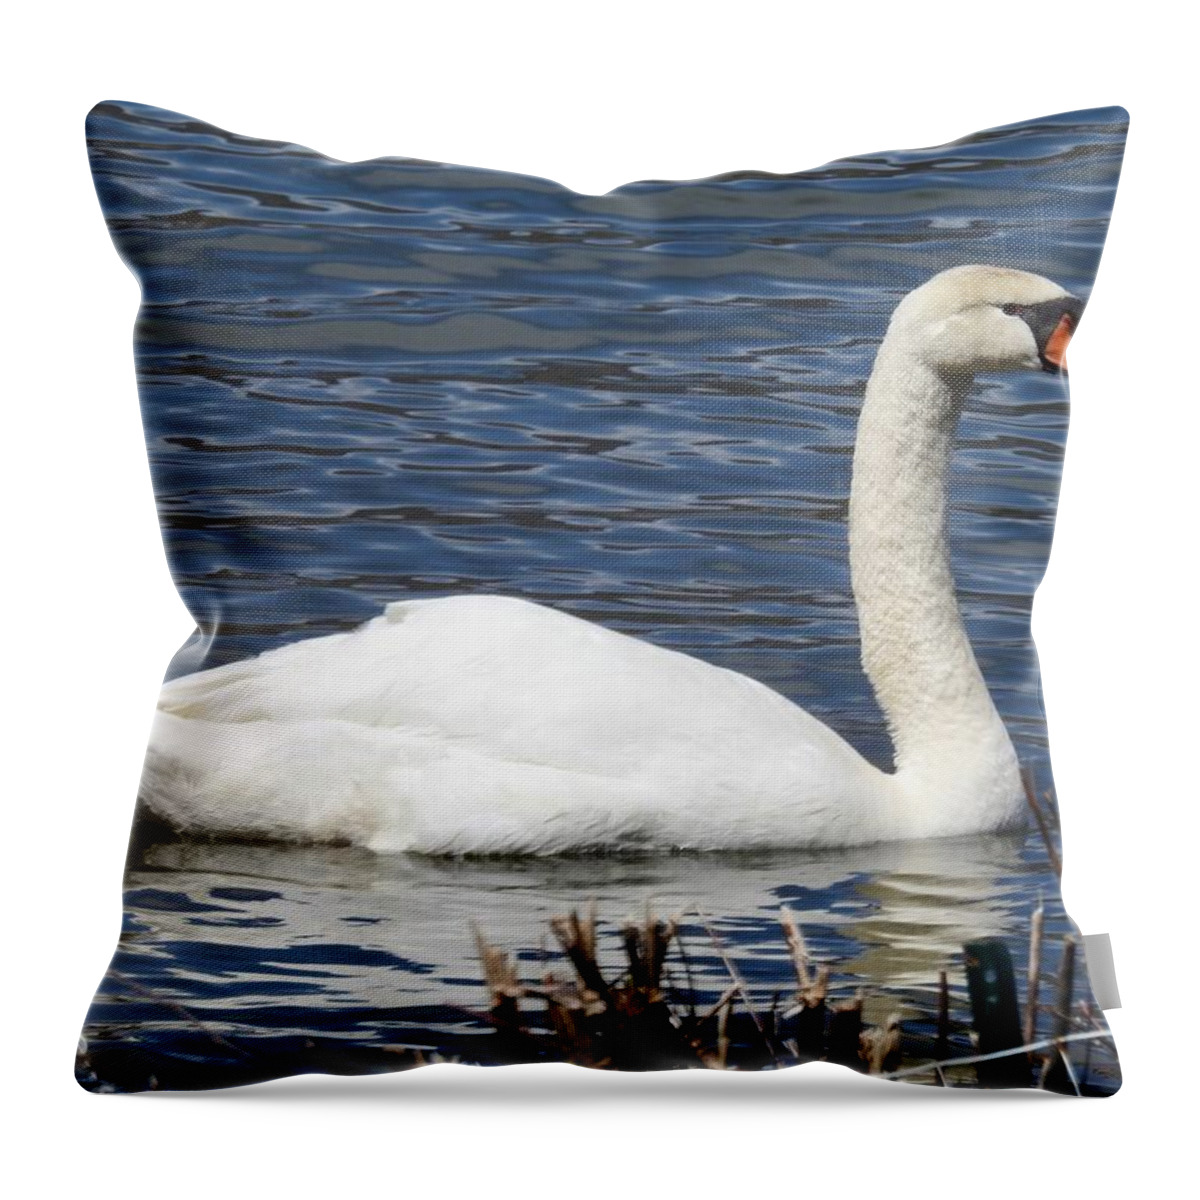 Elegant Swan Throw Pillow featuring the photograph Elegant Swan by Kathy Chism